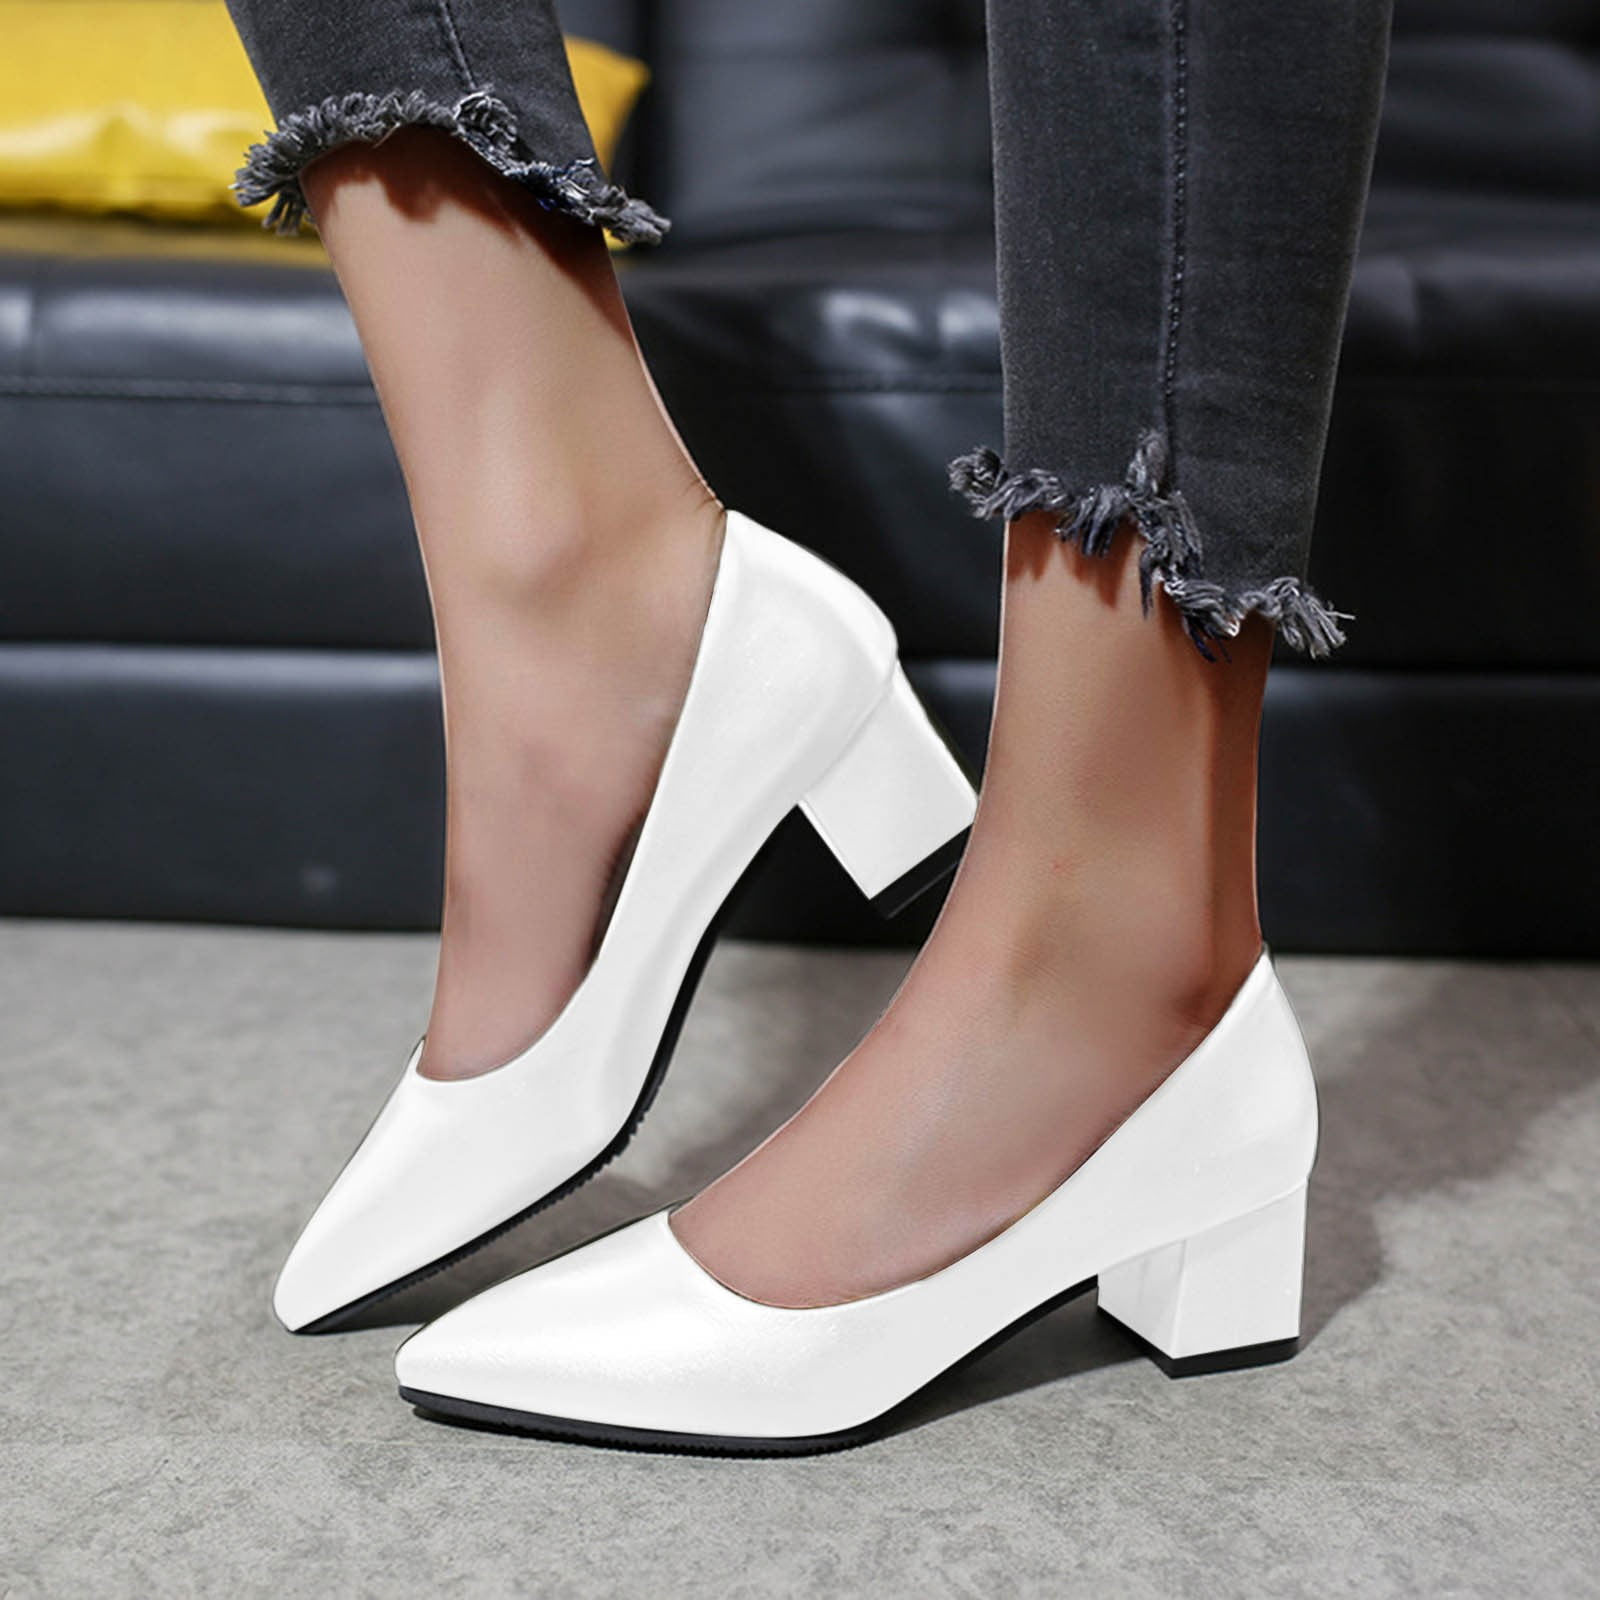 Crab Shoes Latest Casual Daily Wear Heels For Women & Girls-iangel.vn